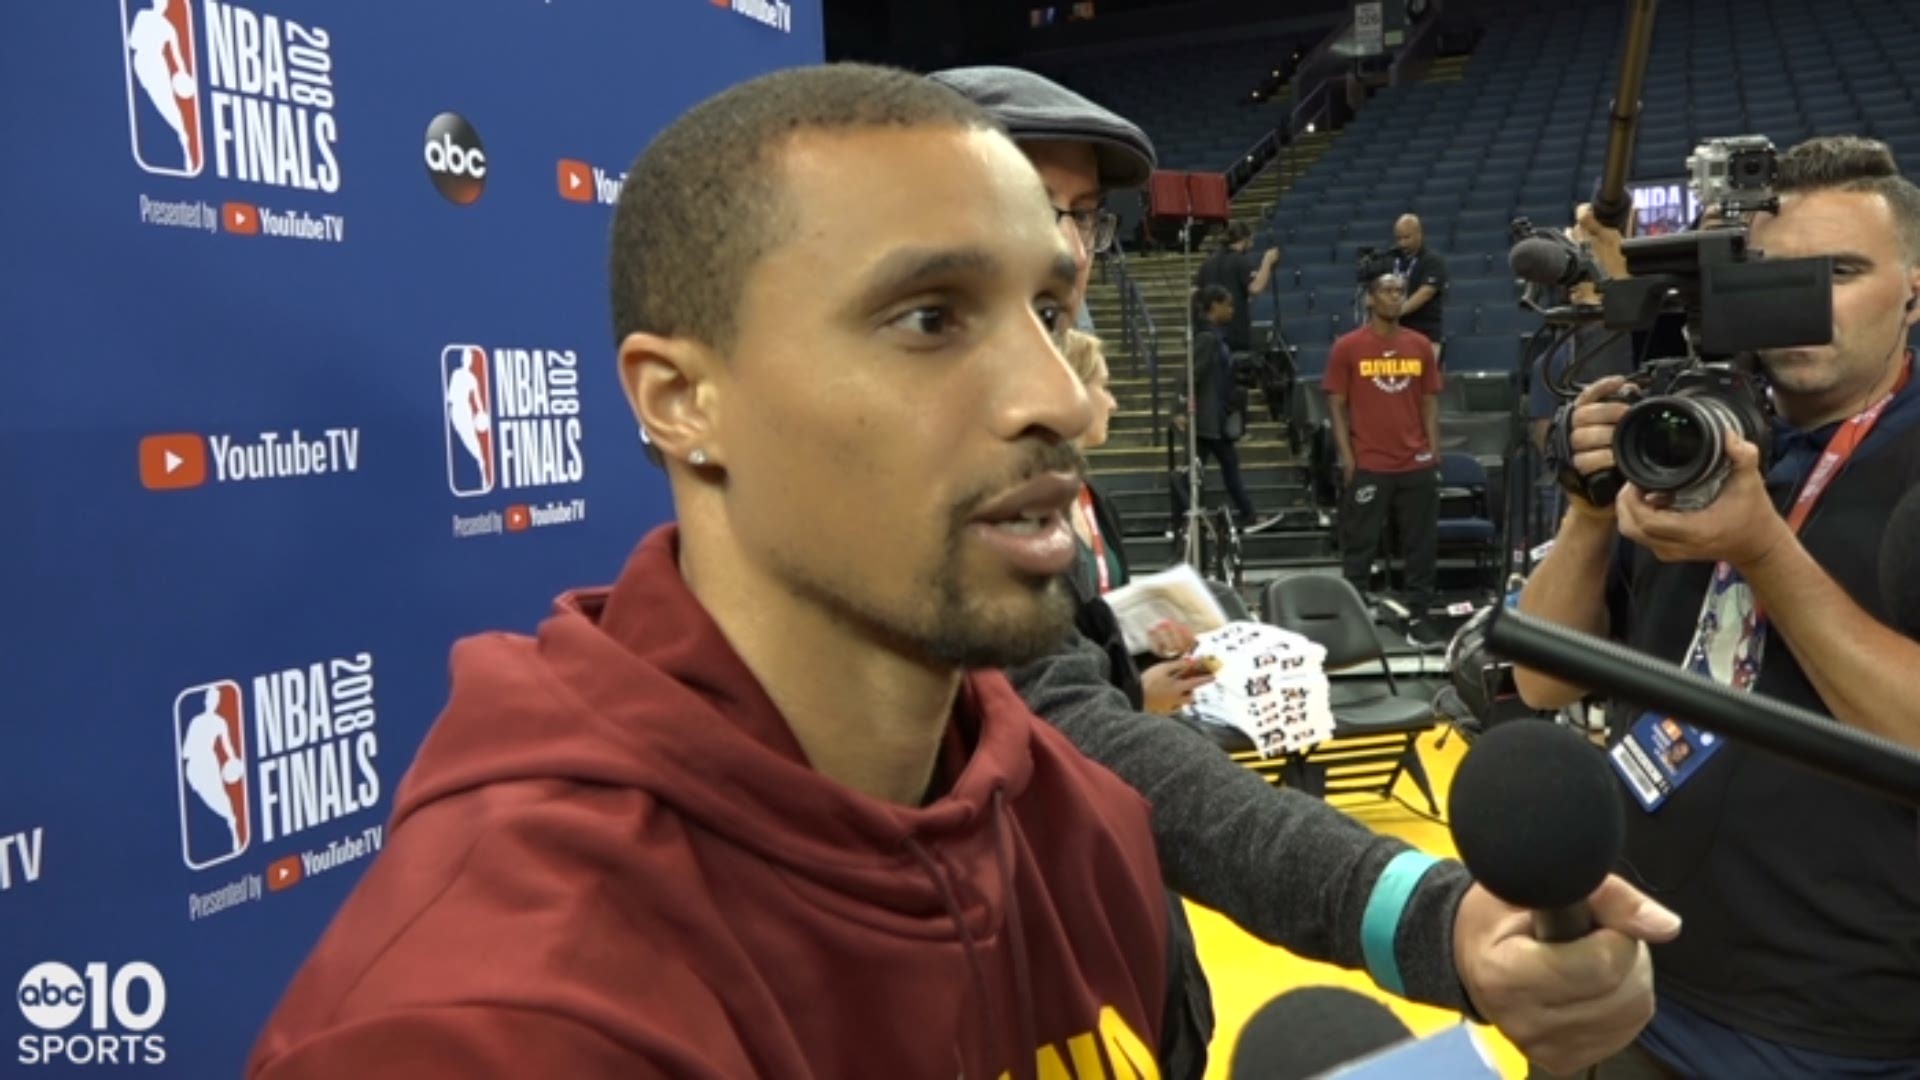 George Hill discusses his odd season, signing with the rebuilding Kings last summer, only to be traded months later from Sacramento to the Cleveland Cavaliers in a quest for an NBA Championship.